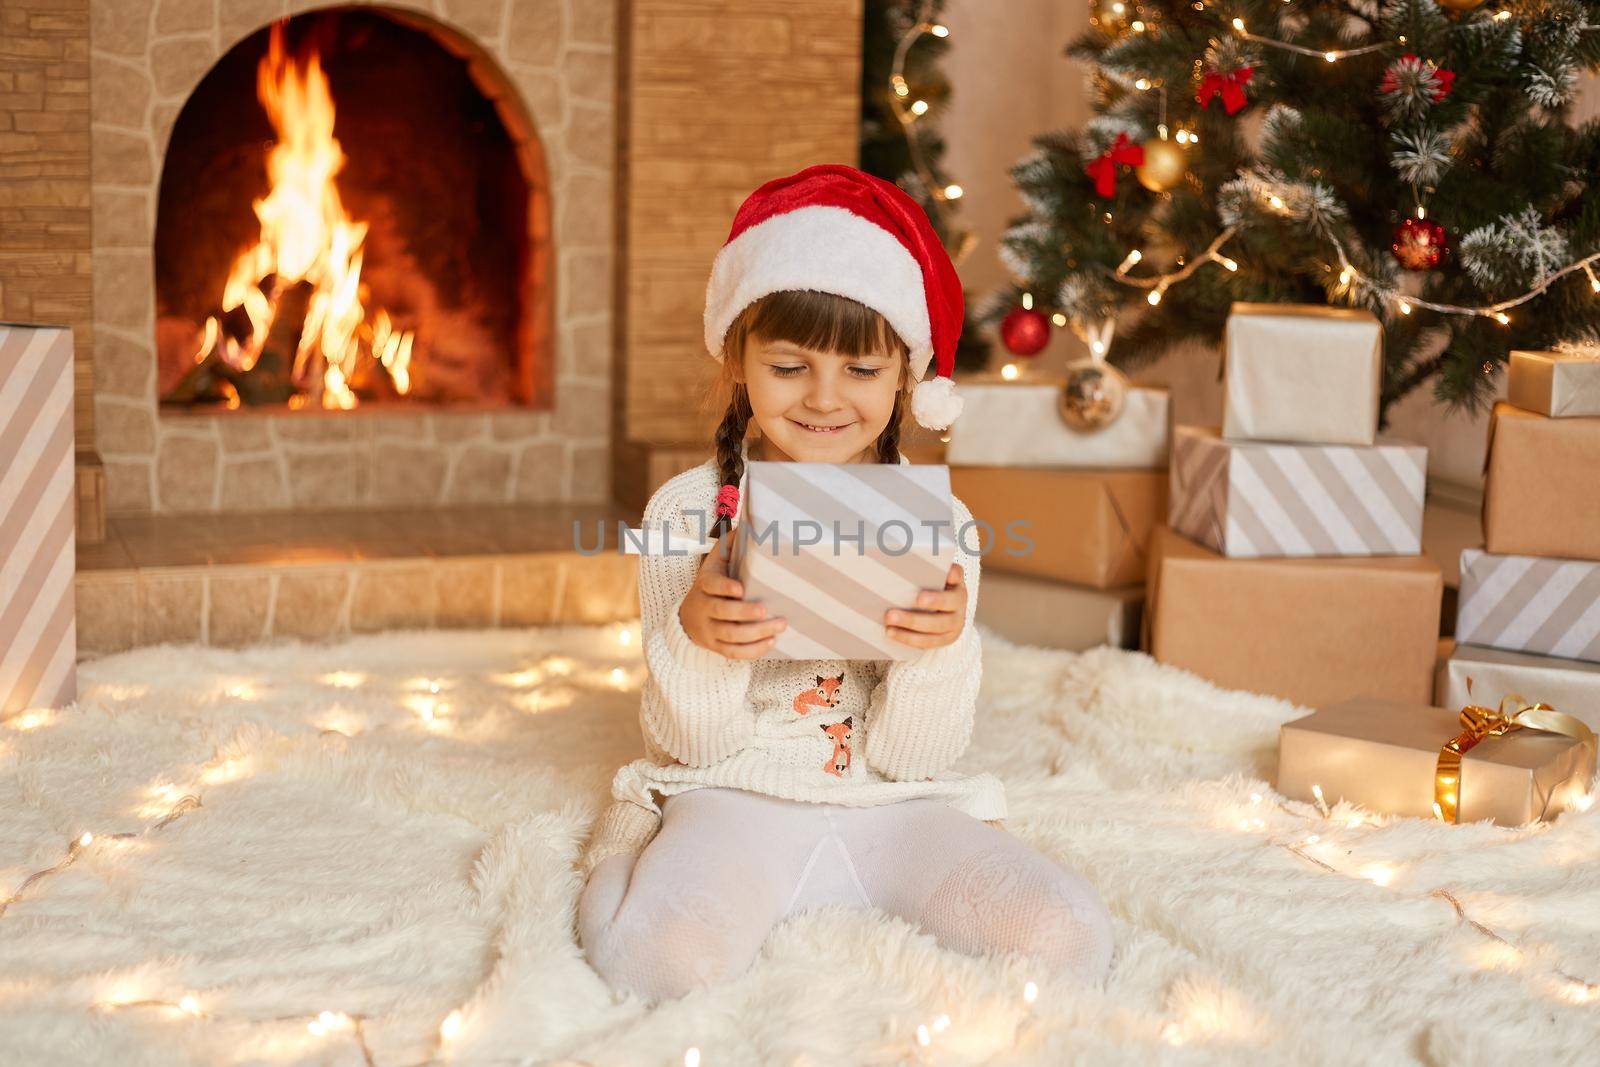 Happy child girl with christmas present at home sitting on warm carpet and looking at box in her hands, has satisfied facial expression, posing near fireplace and Christmas tree.